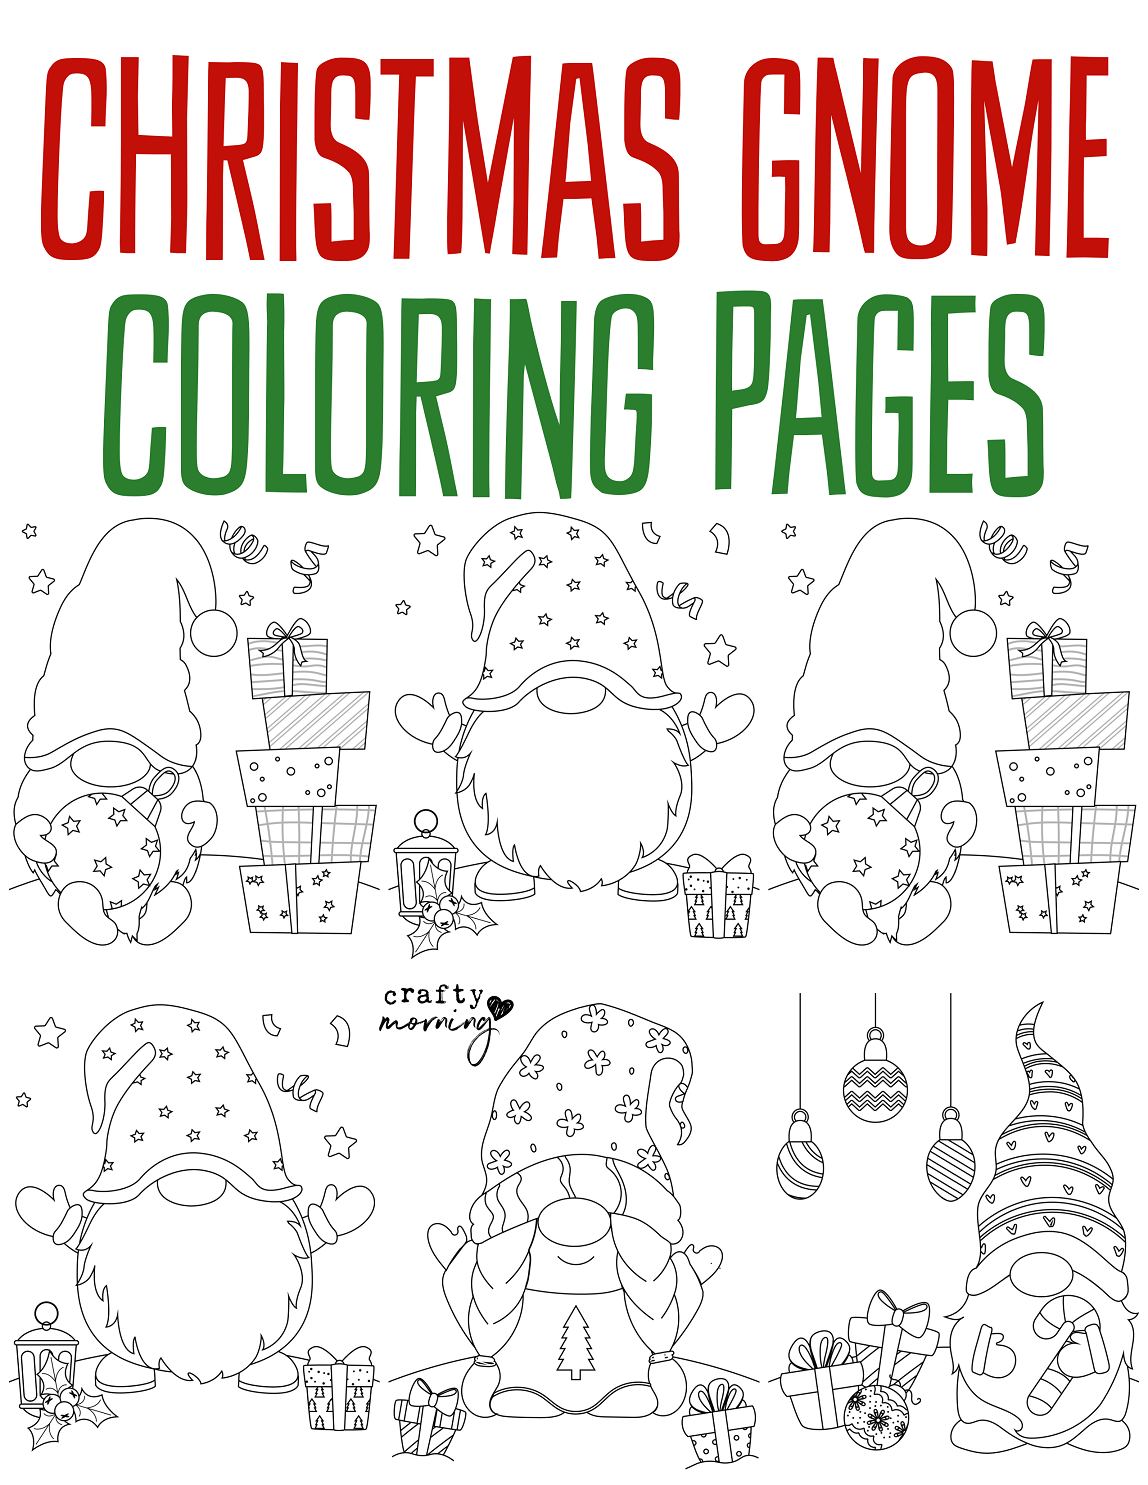 Cute Coloring Pages for Kids to Print - Crafty Morning